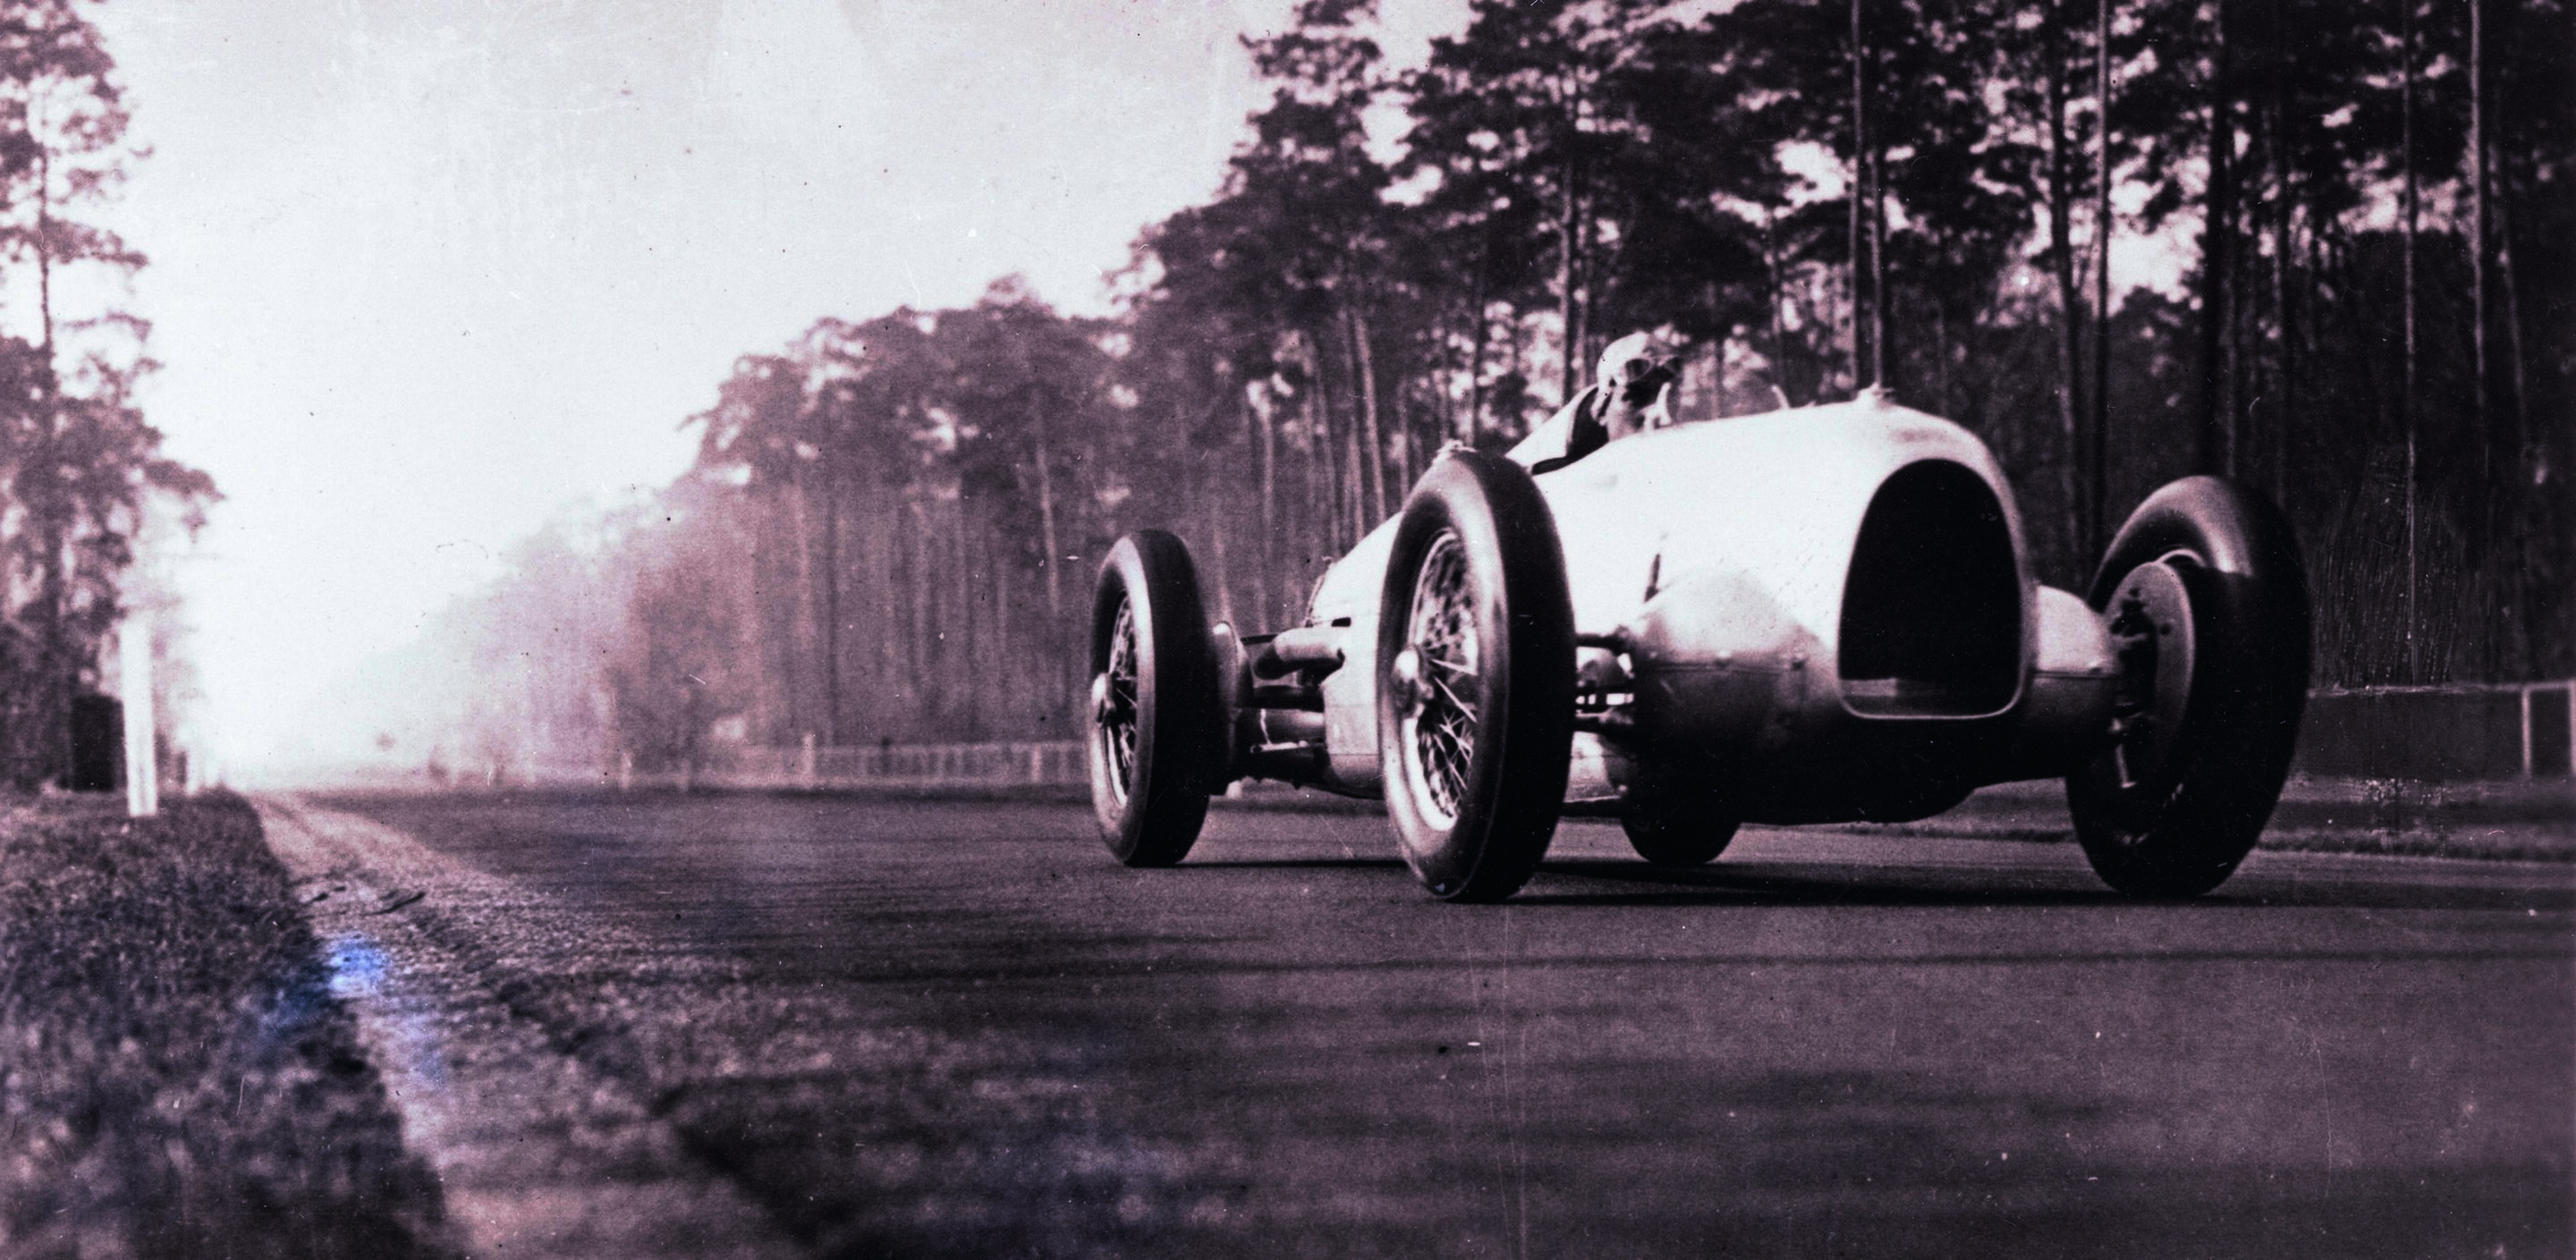 First appearance of the Auto Union „Silver Arrow“ on the Avus race track in Berlin 1934: Hans Stuck at the wheel of the Auto Union Typ A race car